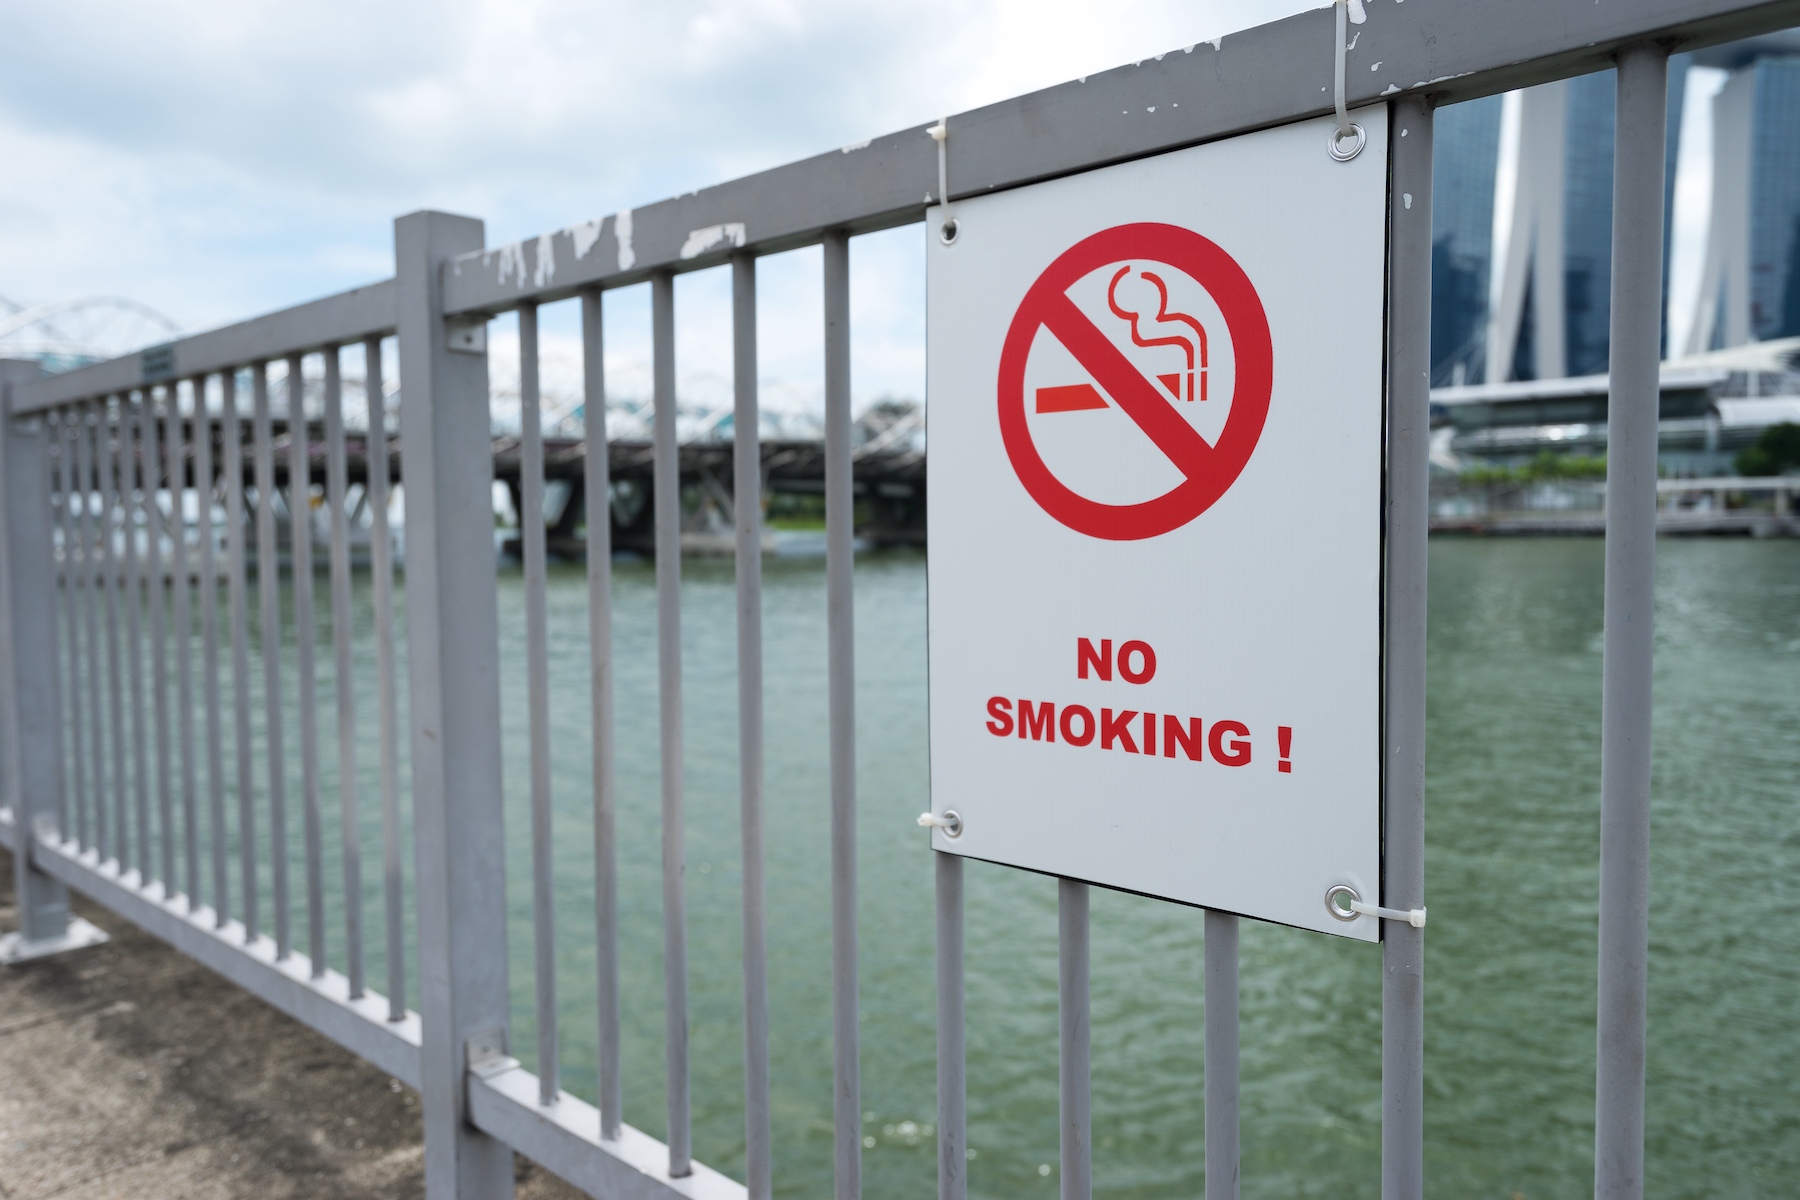 A white sign reads 'no smoking' on a steel railing by river

